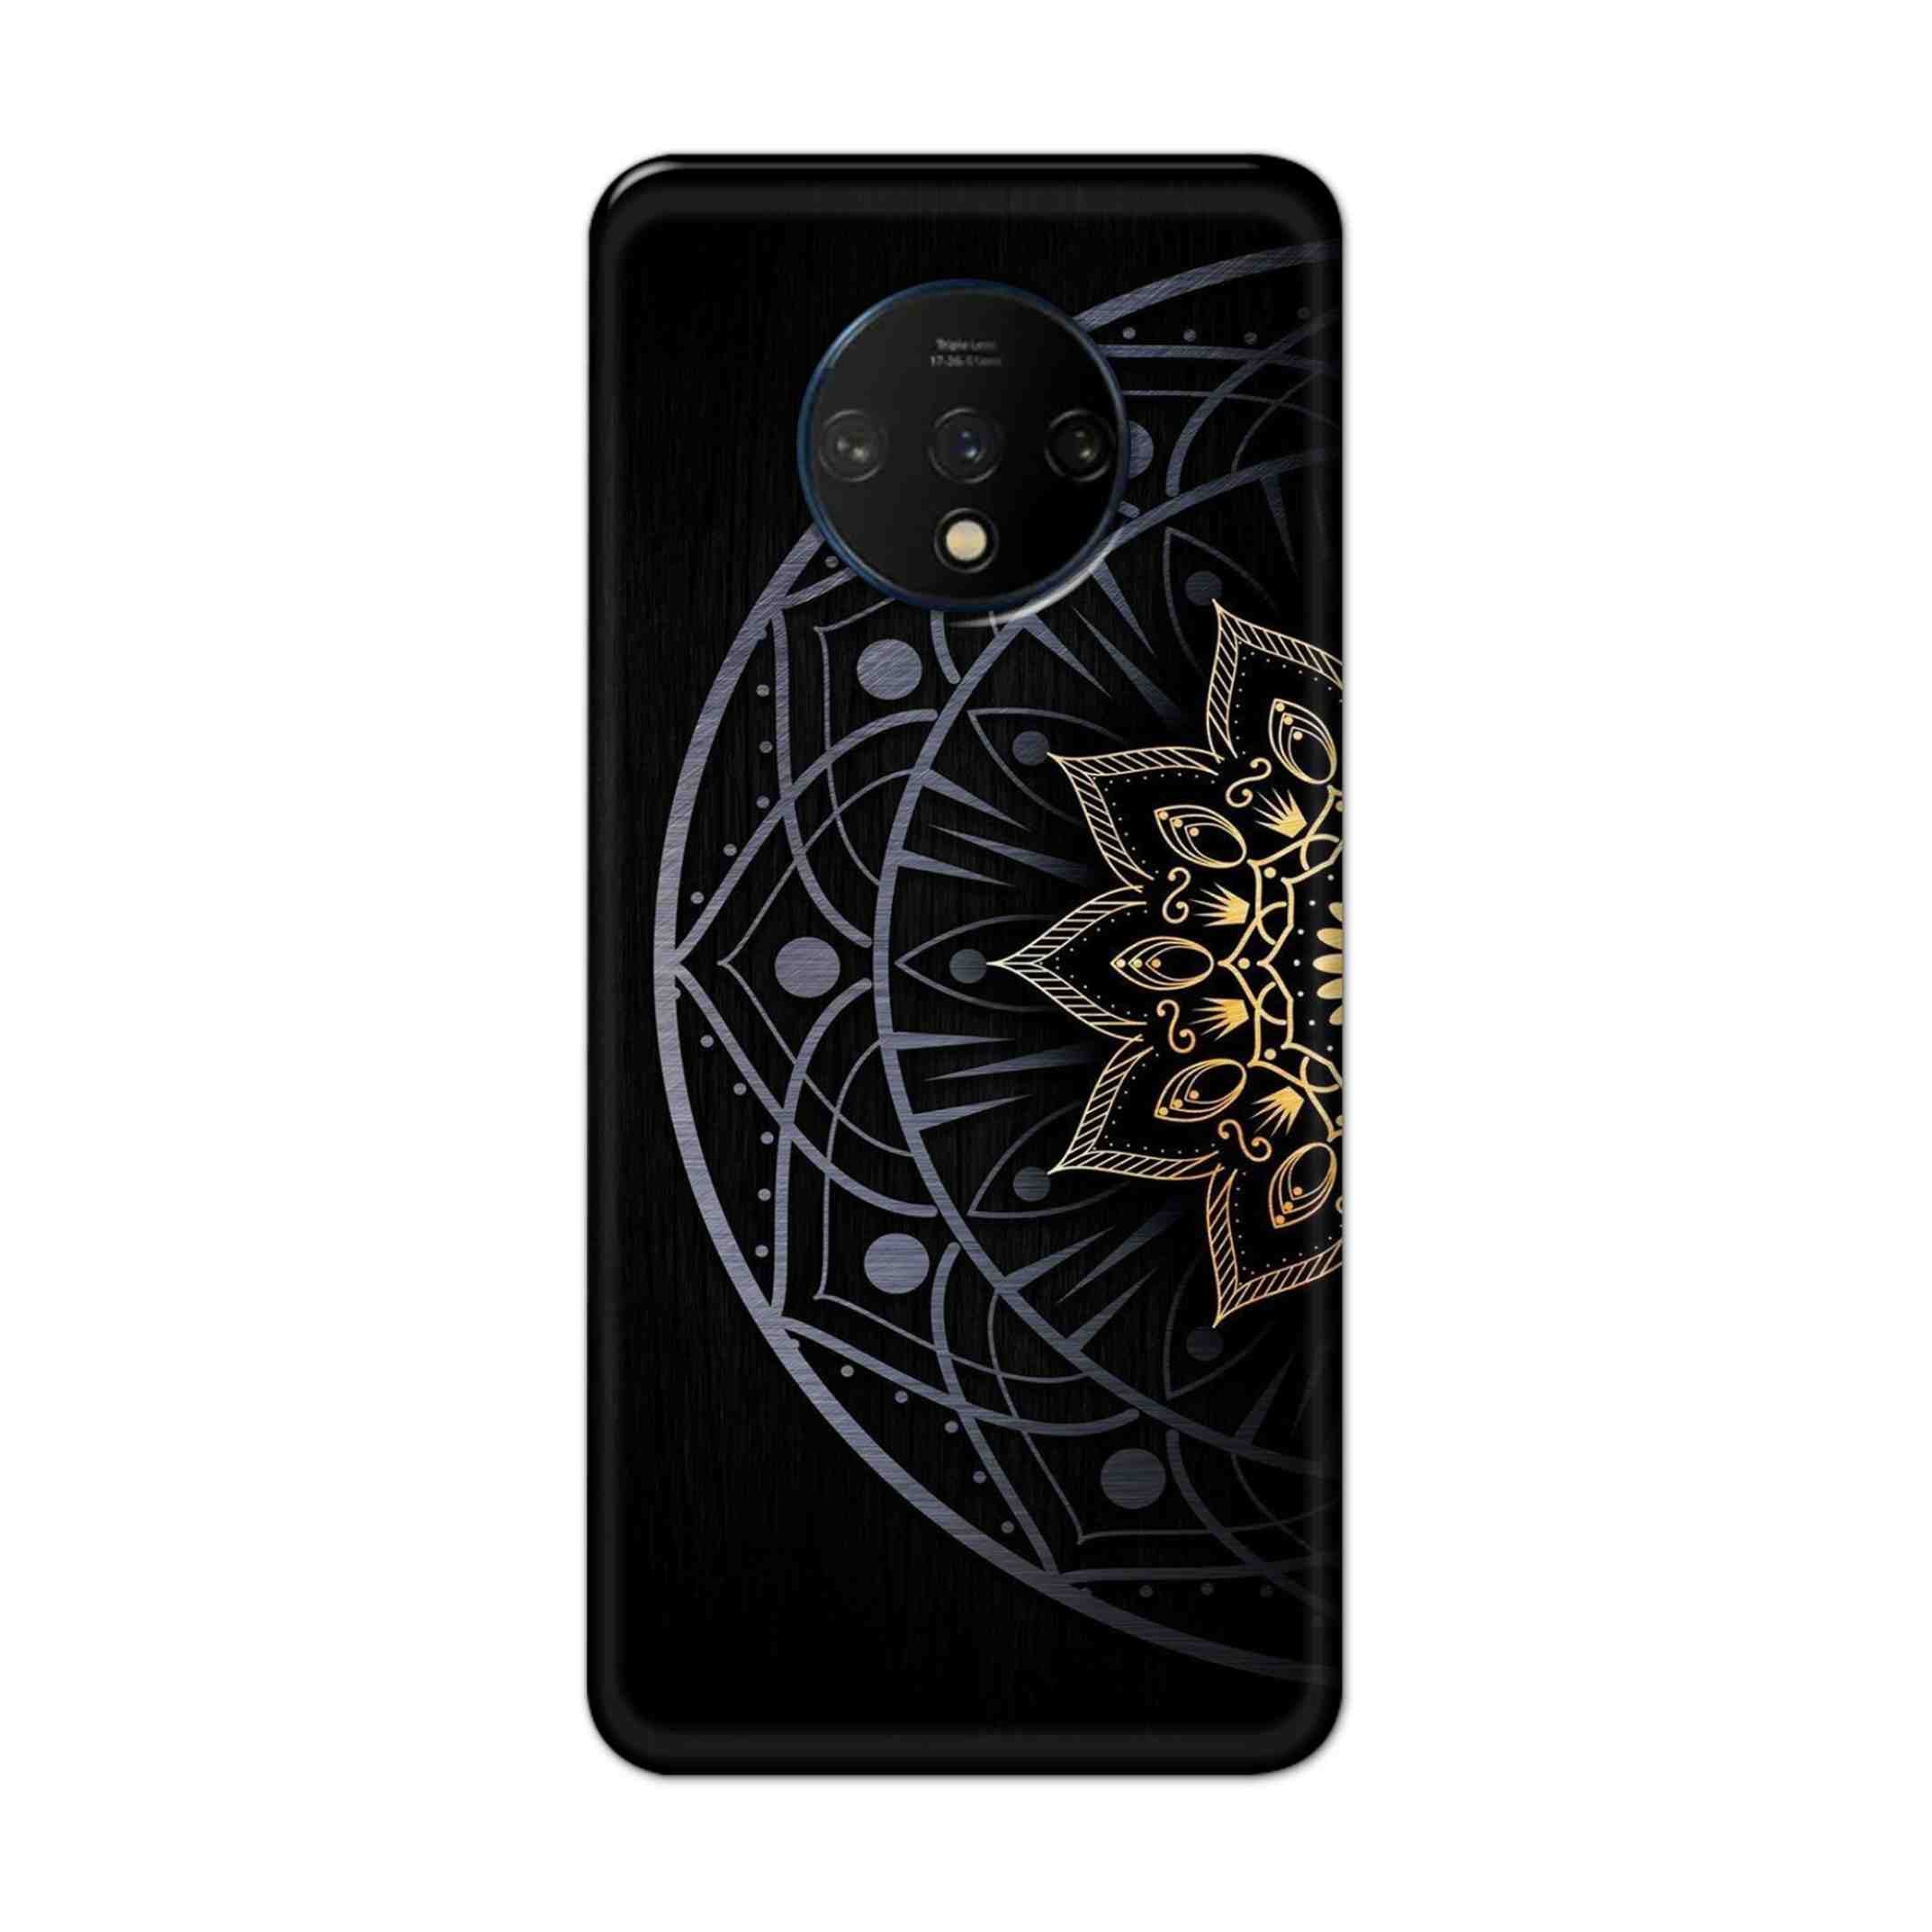 Buy Psychedelic Mandalas Hard Back Mobile Phone Case Cover For OnePlus 7T Online